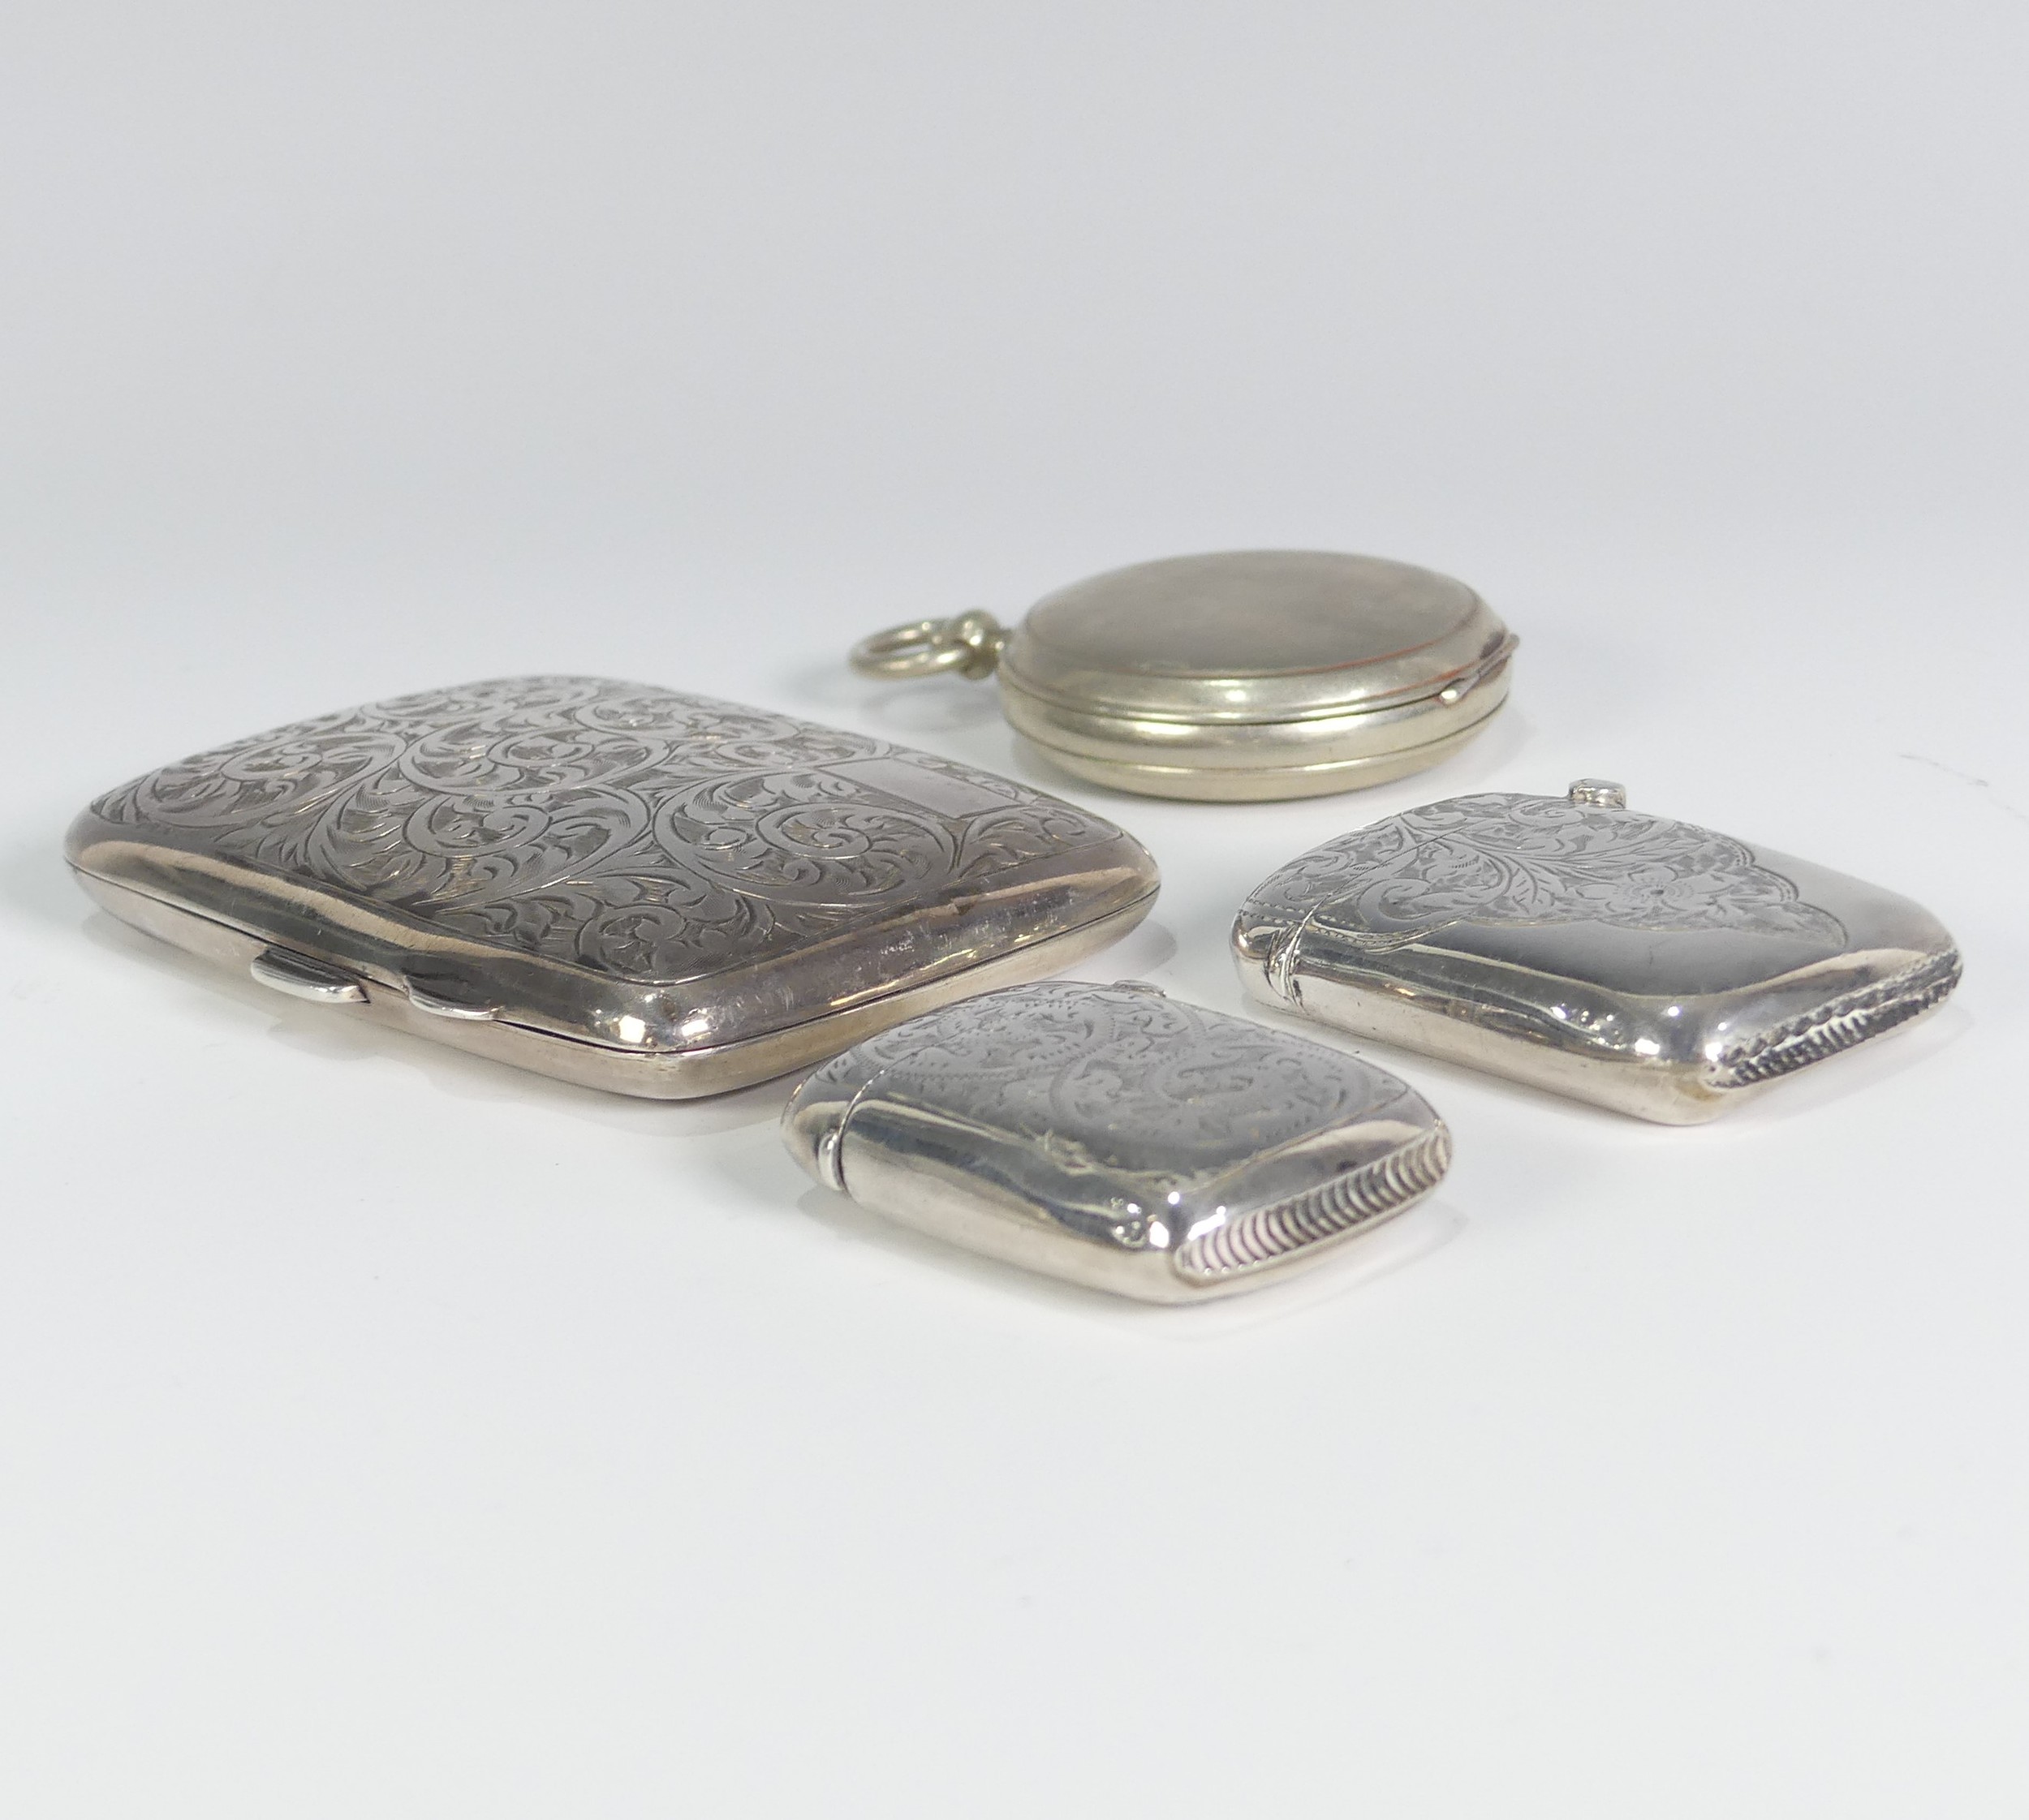 A George V silver Cigarette Case, by Joseph Gloster Ltd., hallmarked Birmingham, 1929, of hinged